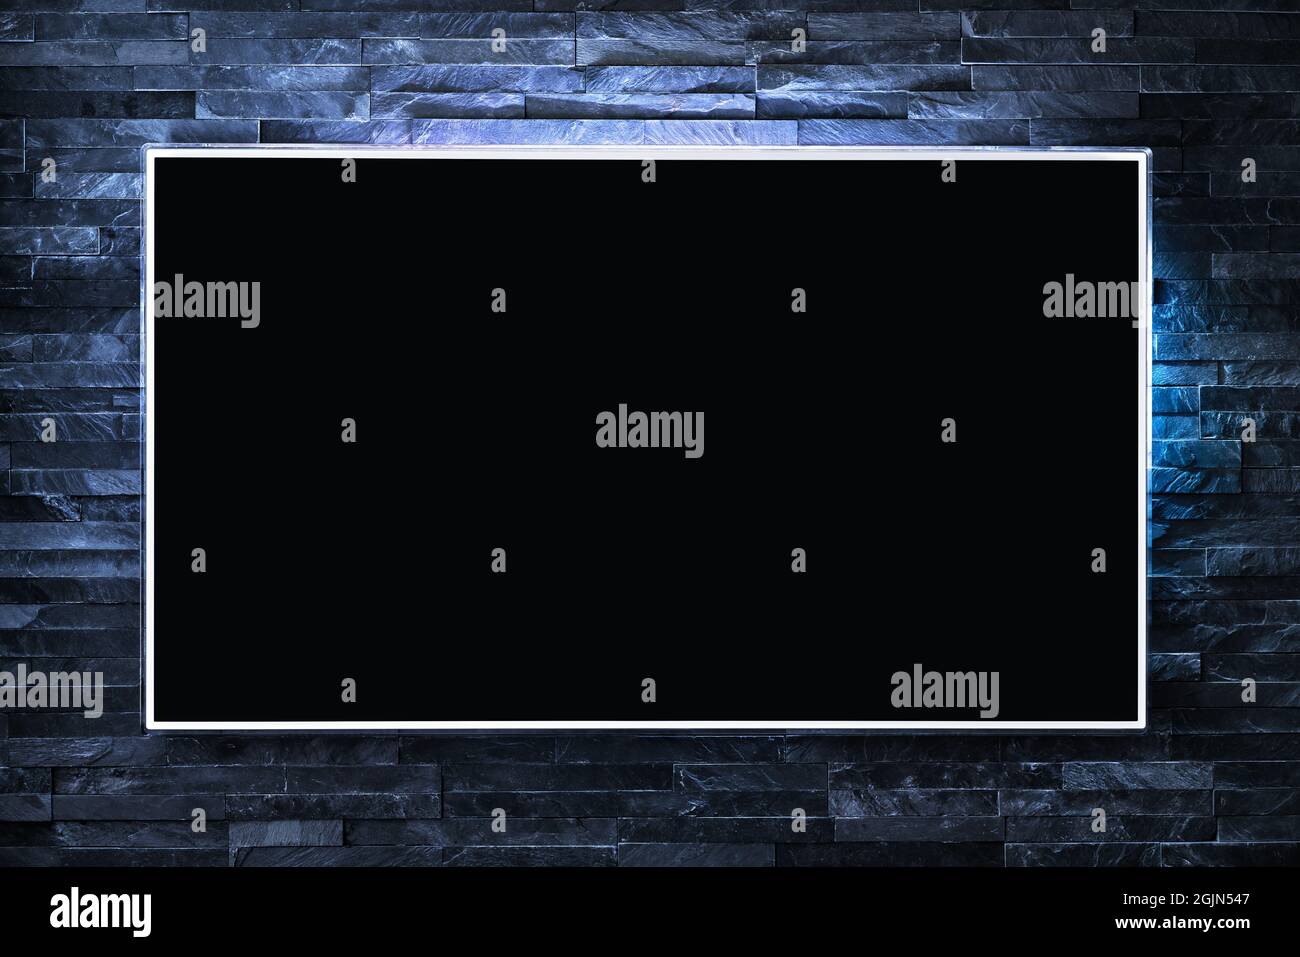 Tv screen on wall at night in dark with led light. Television and flat smart monitor display on blue brick background. Modern futuristic loft. Stock Photo